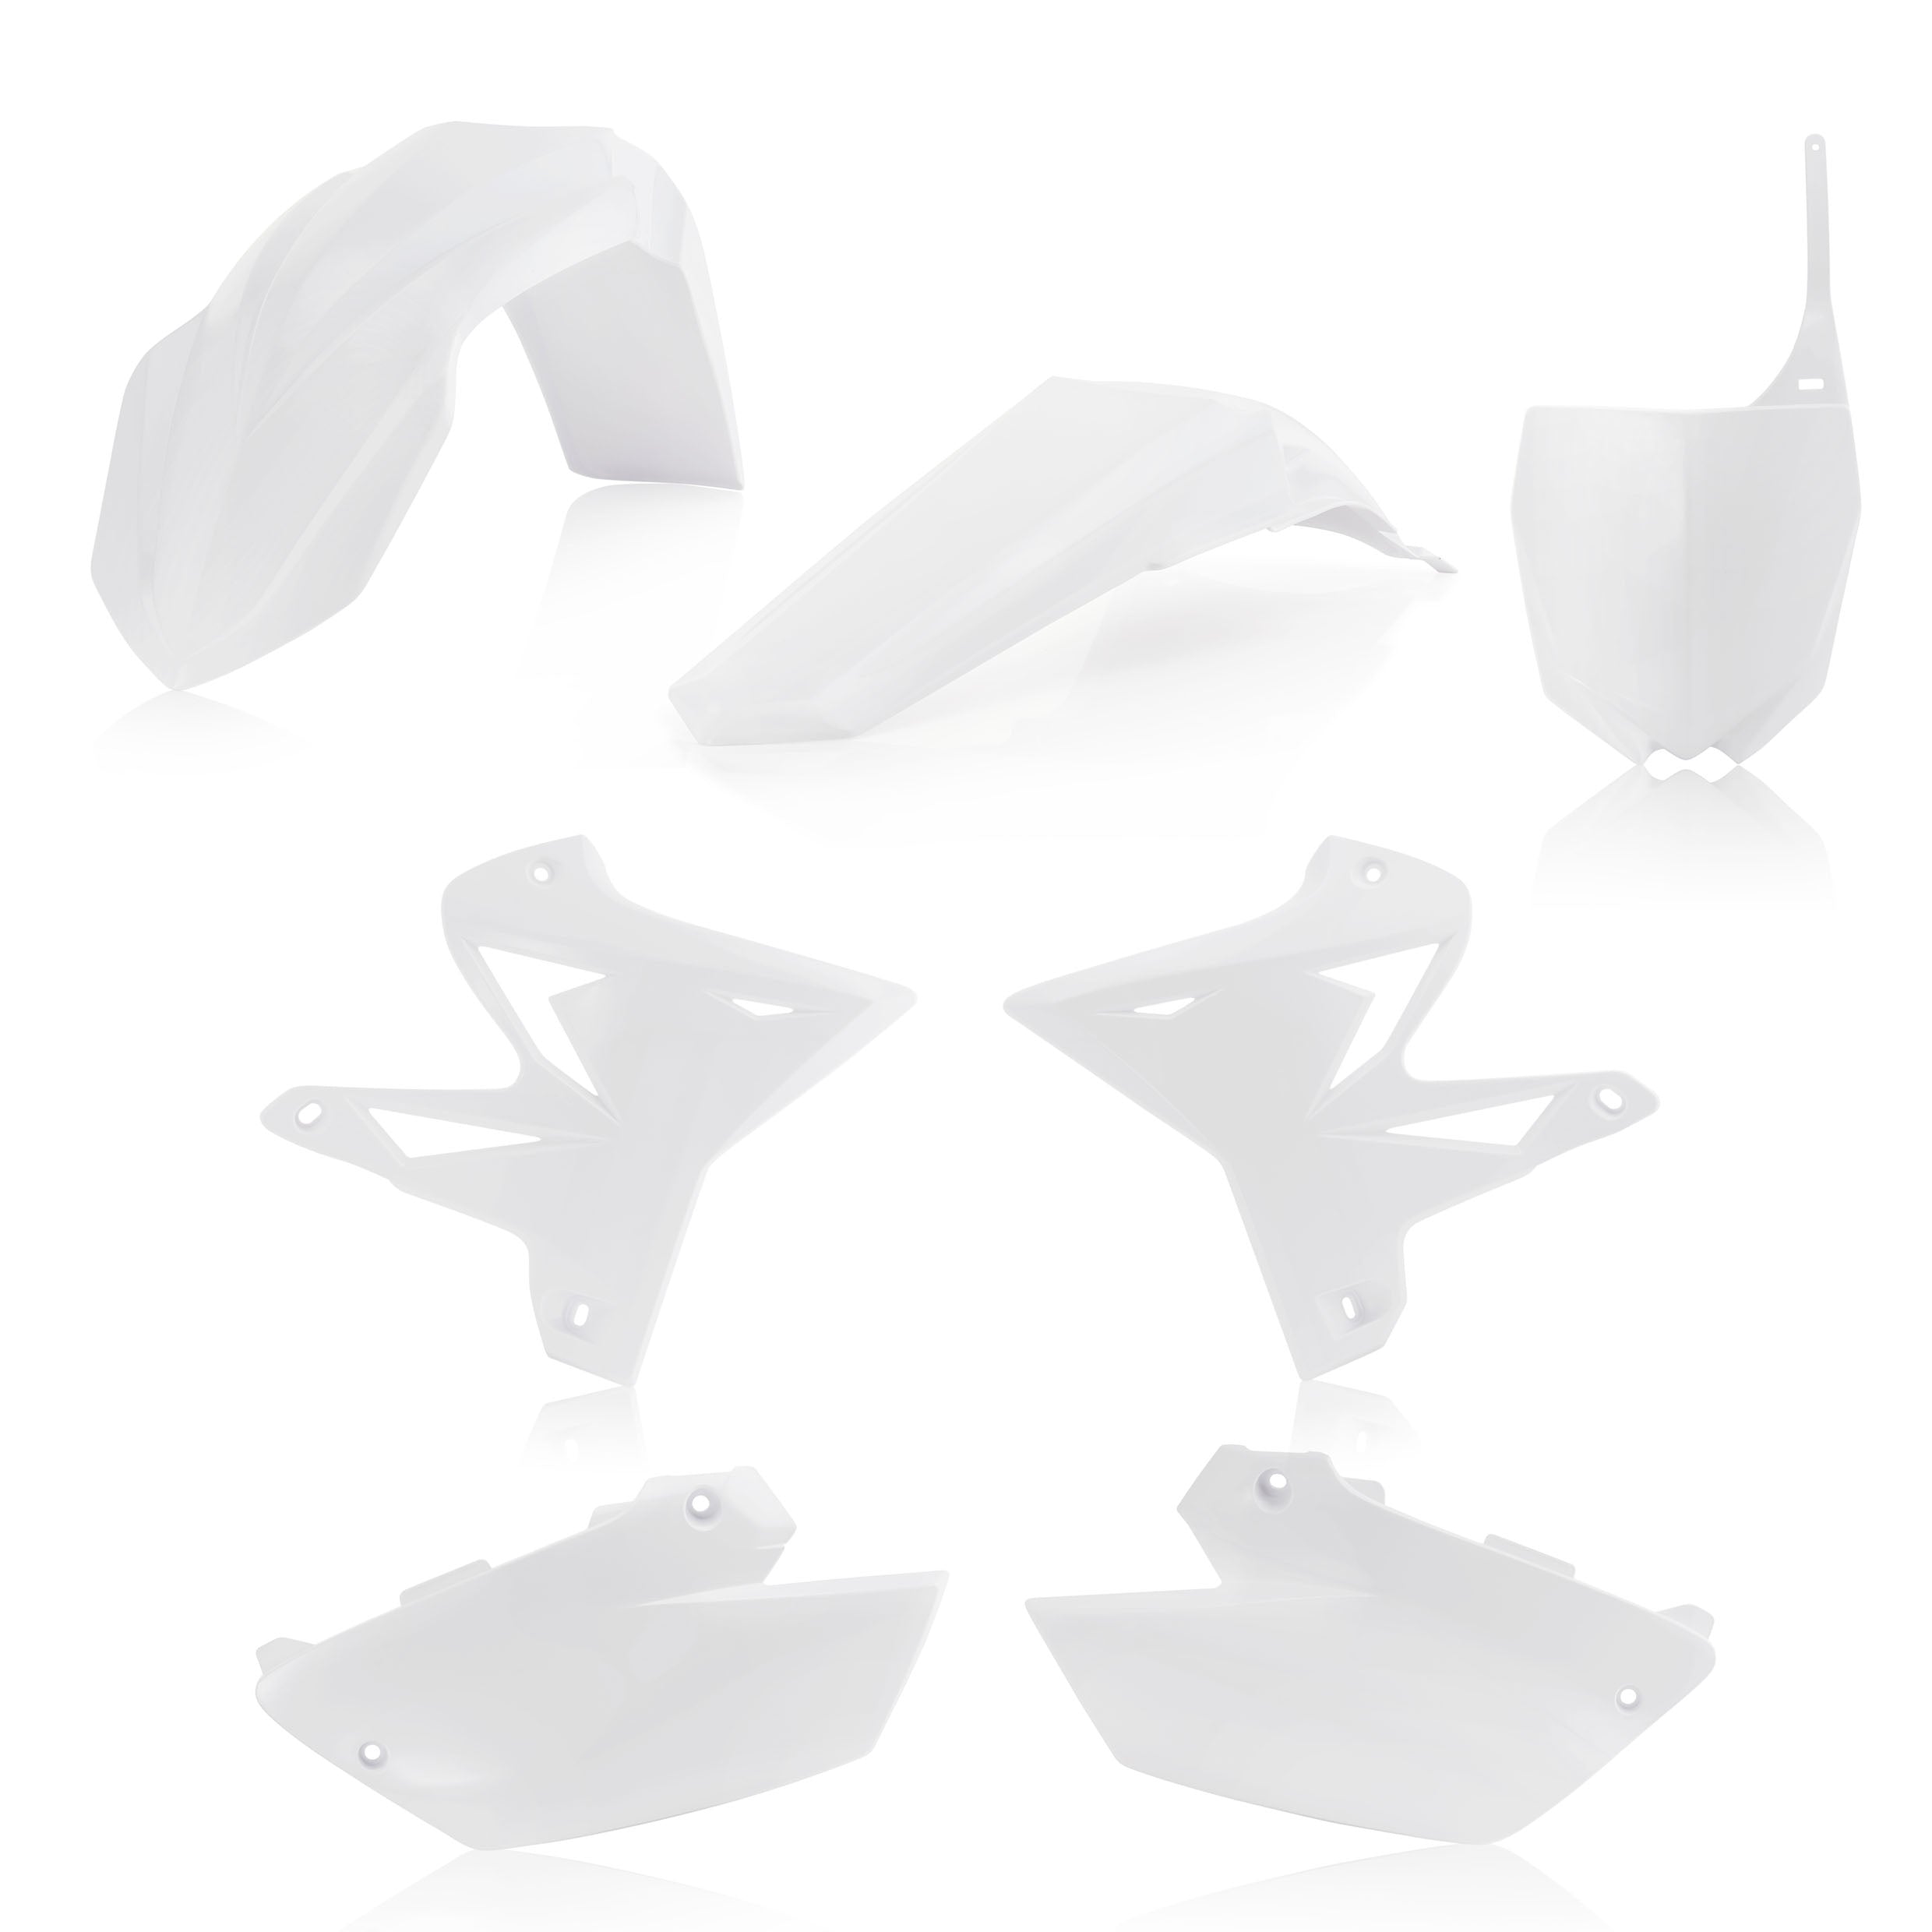 ACERBIS 0023488.030 KIT RESTYLING BIANCO COMPATIBLE CON YAMAHA YZ 125 02/14